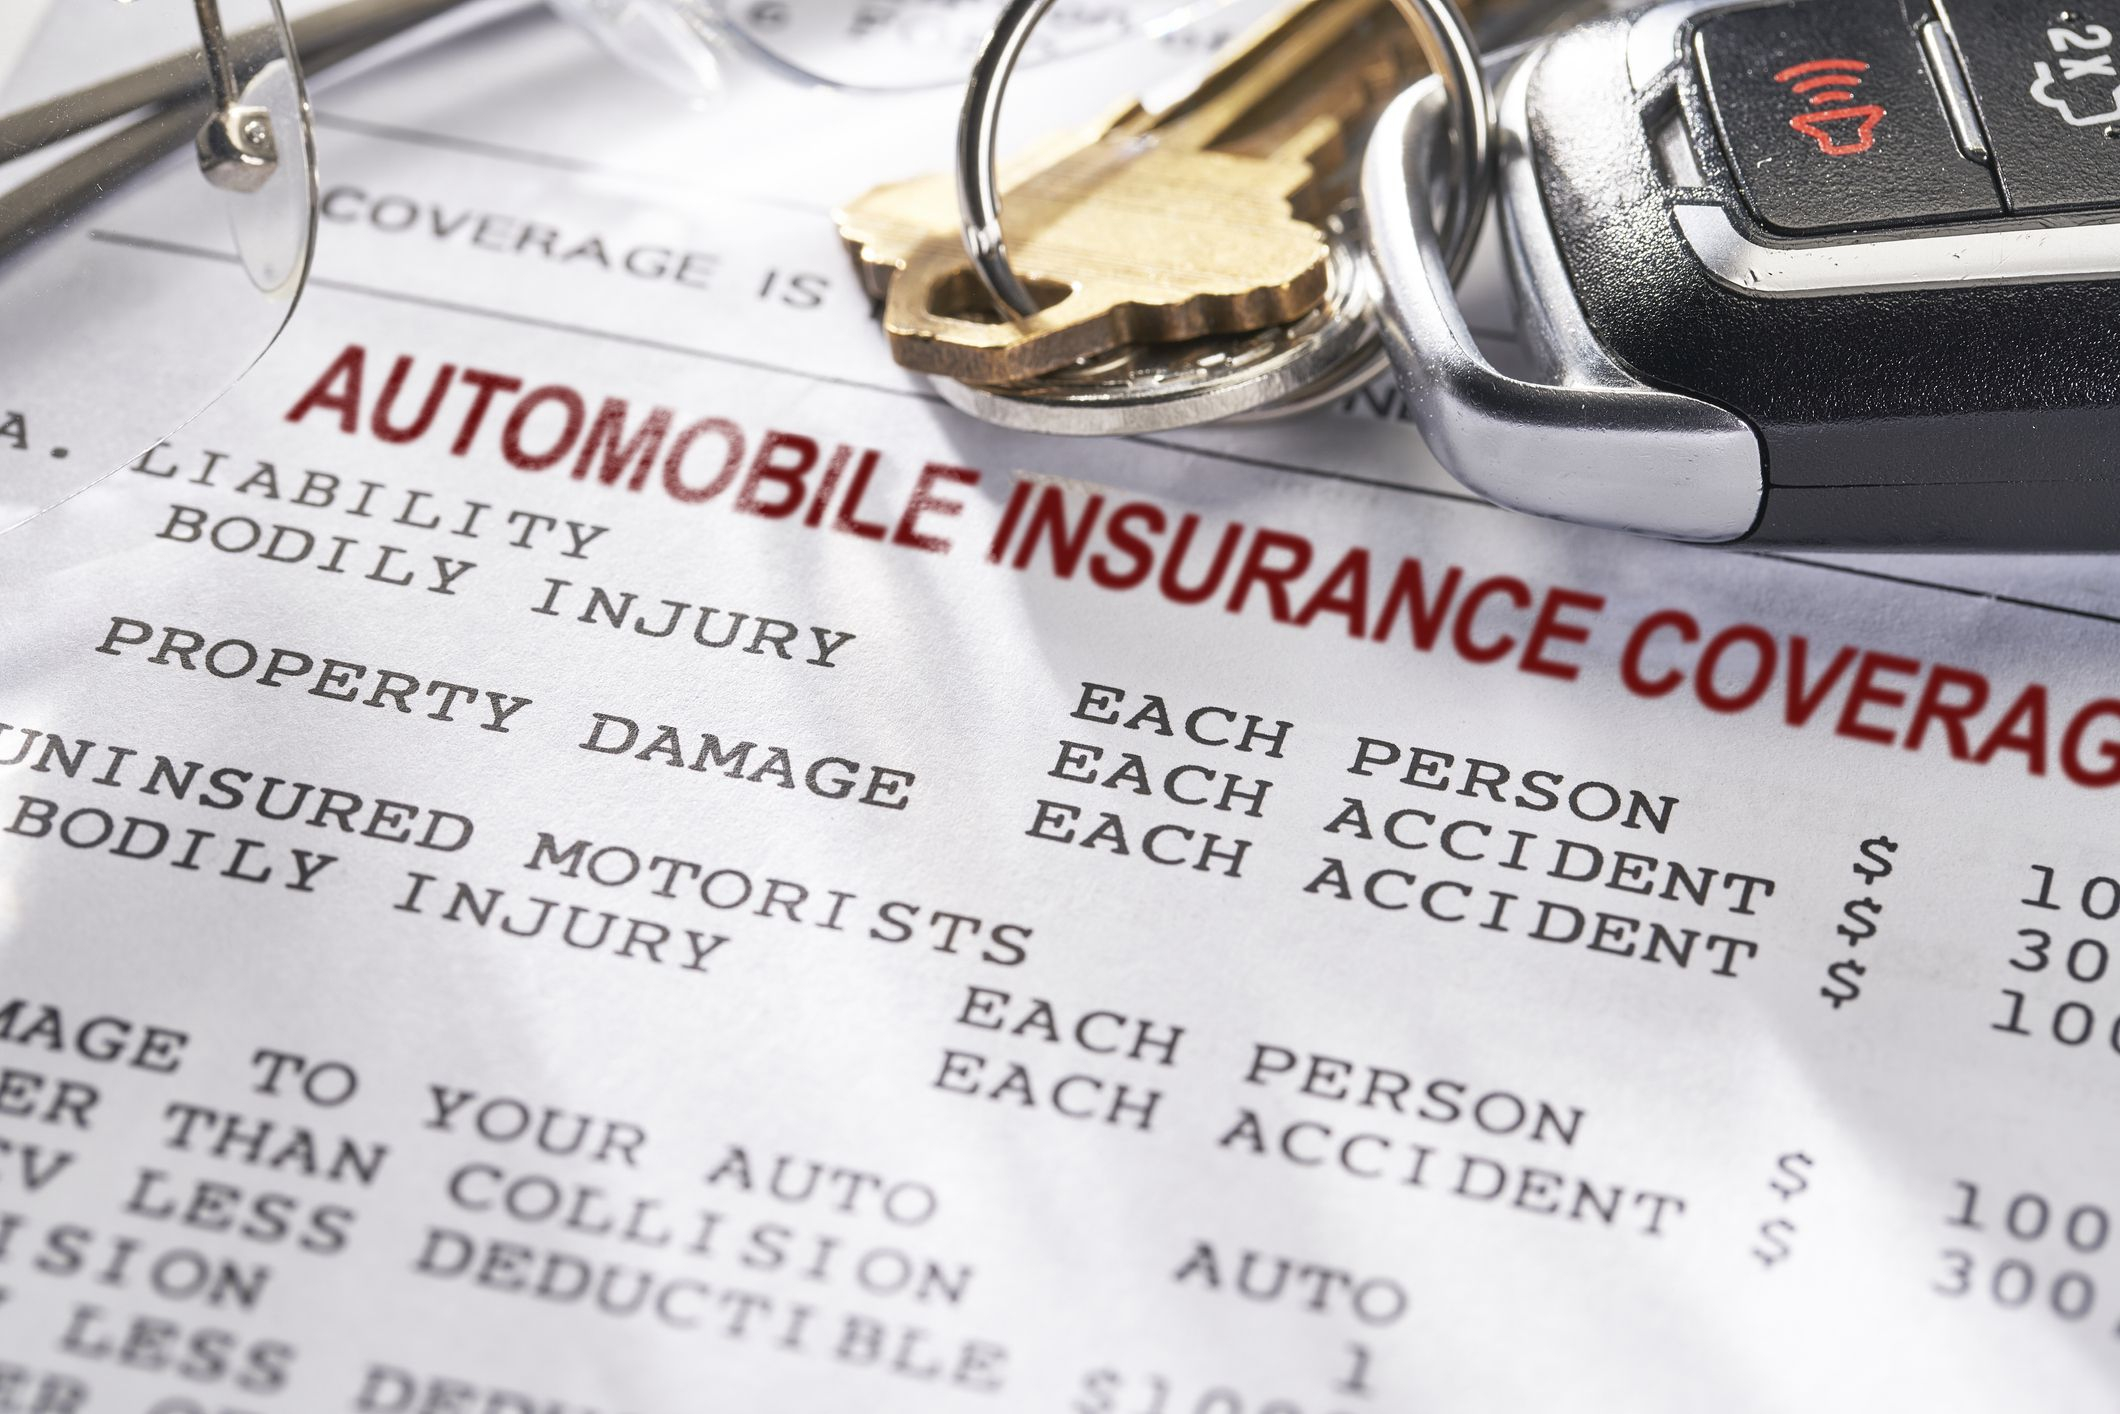 15 Tips And Ideas For Cutting Car Insurance Costs pertaining to dimensions 2120 X 1414